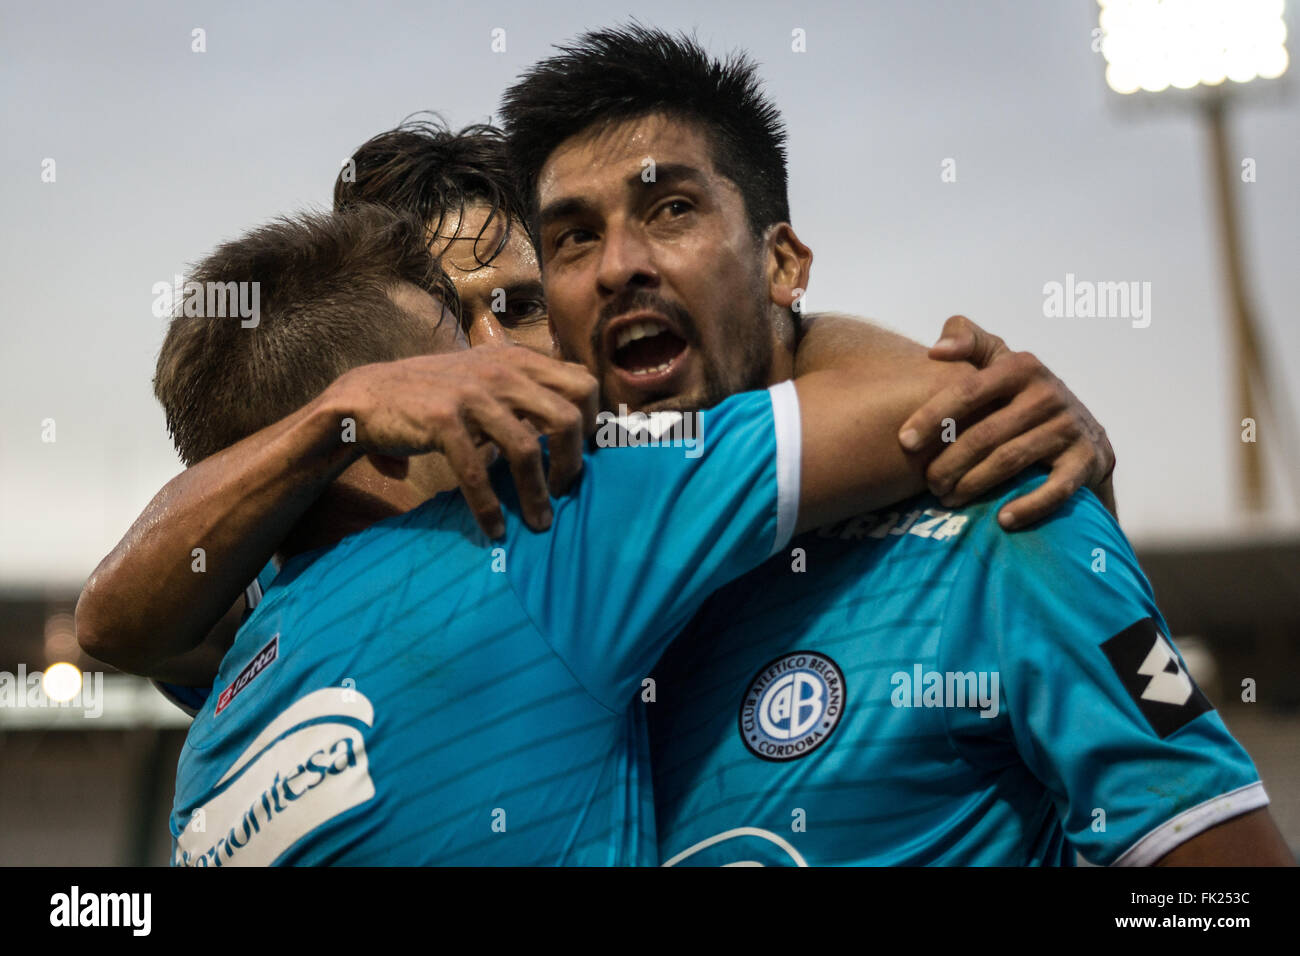 Cordoba, Argentina. 5th March, 2016. Pier Barrios, Defense de Belgrano celebration for the goal during a match between Belgrano and Sarmiento as part of the sixth round of Primera Division. in Mario Kempes Stadium on March 05, 2014 in Cordoba, Argentina. Stock Photo